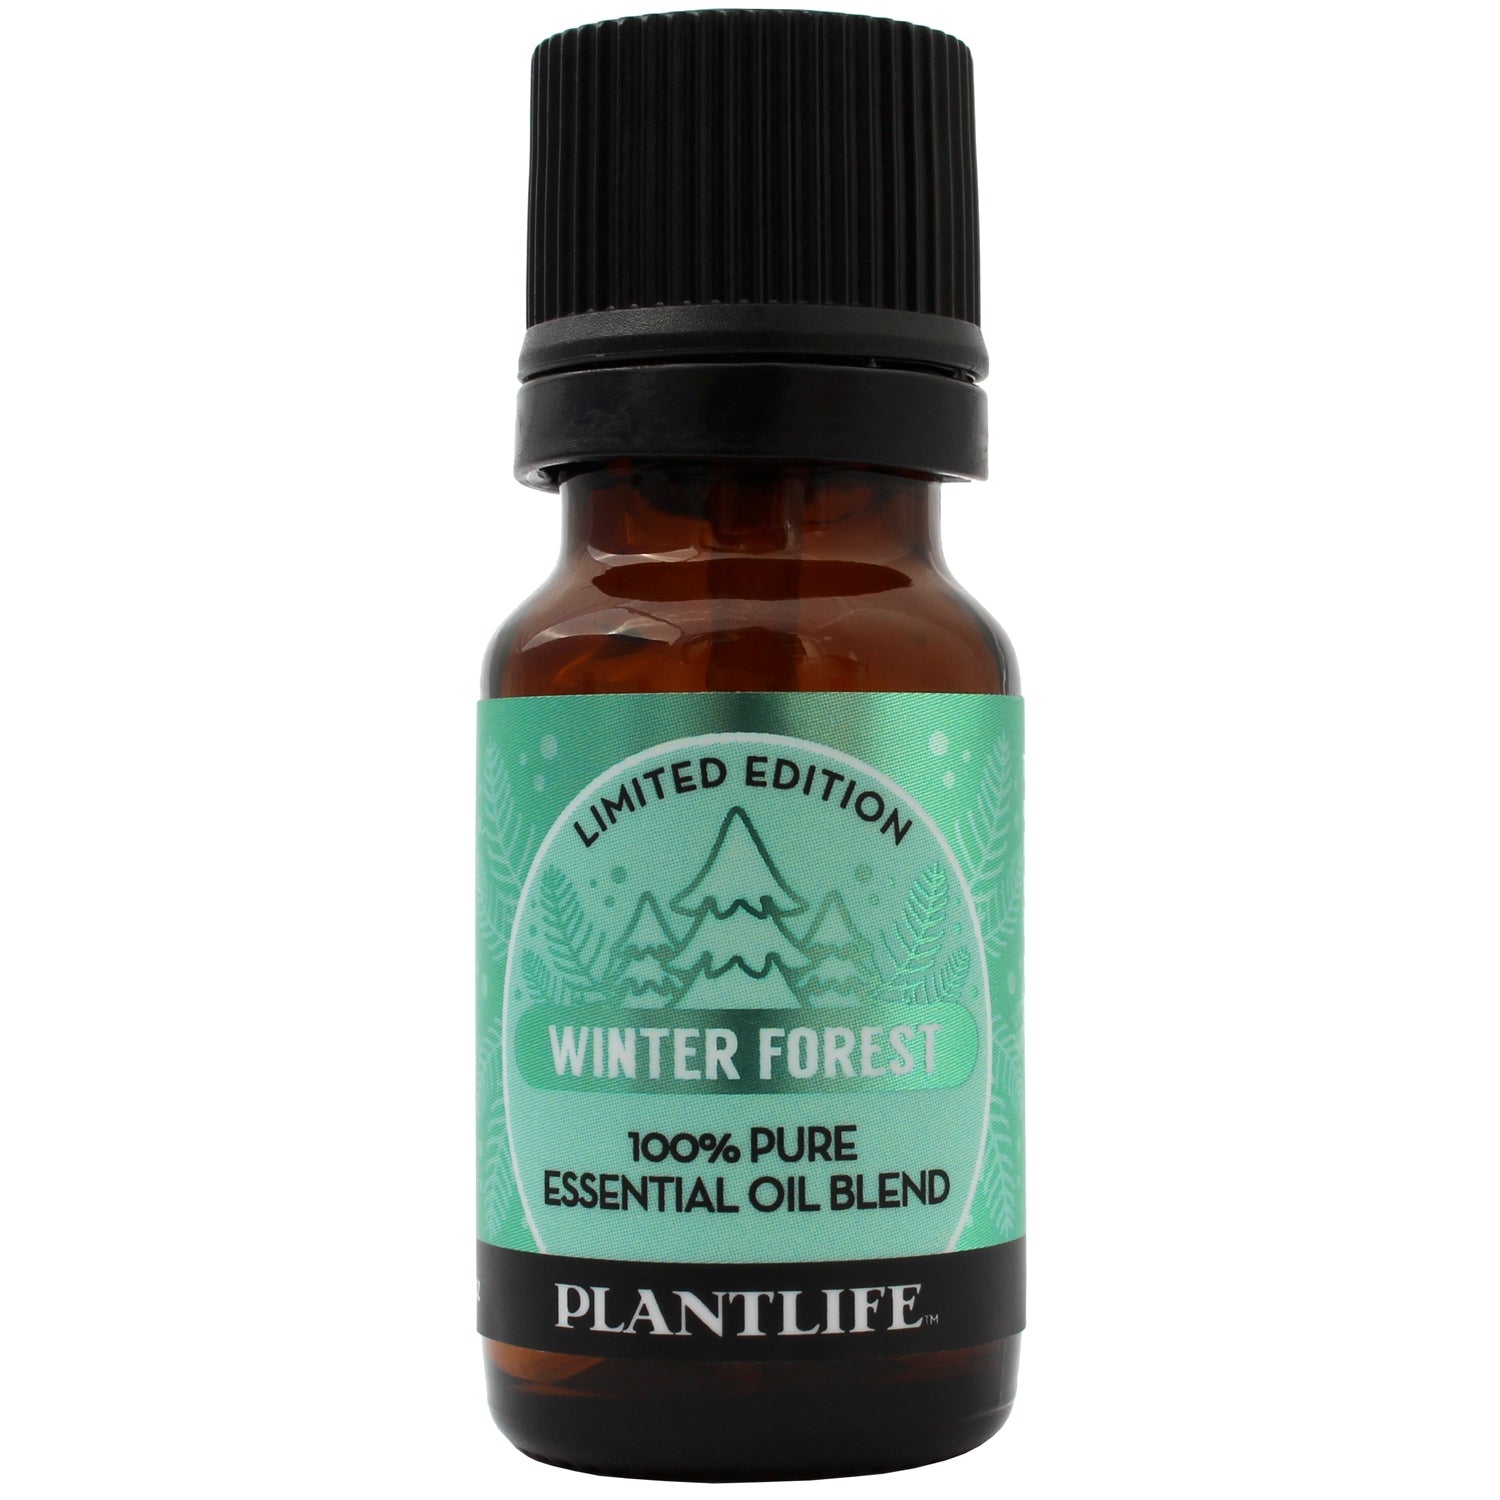 Winter Forest Essential Oil Blend